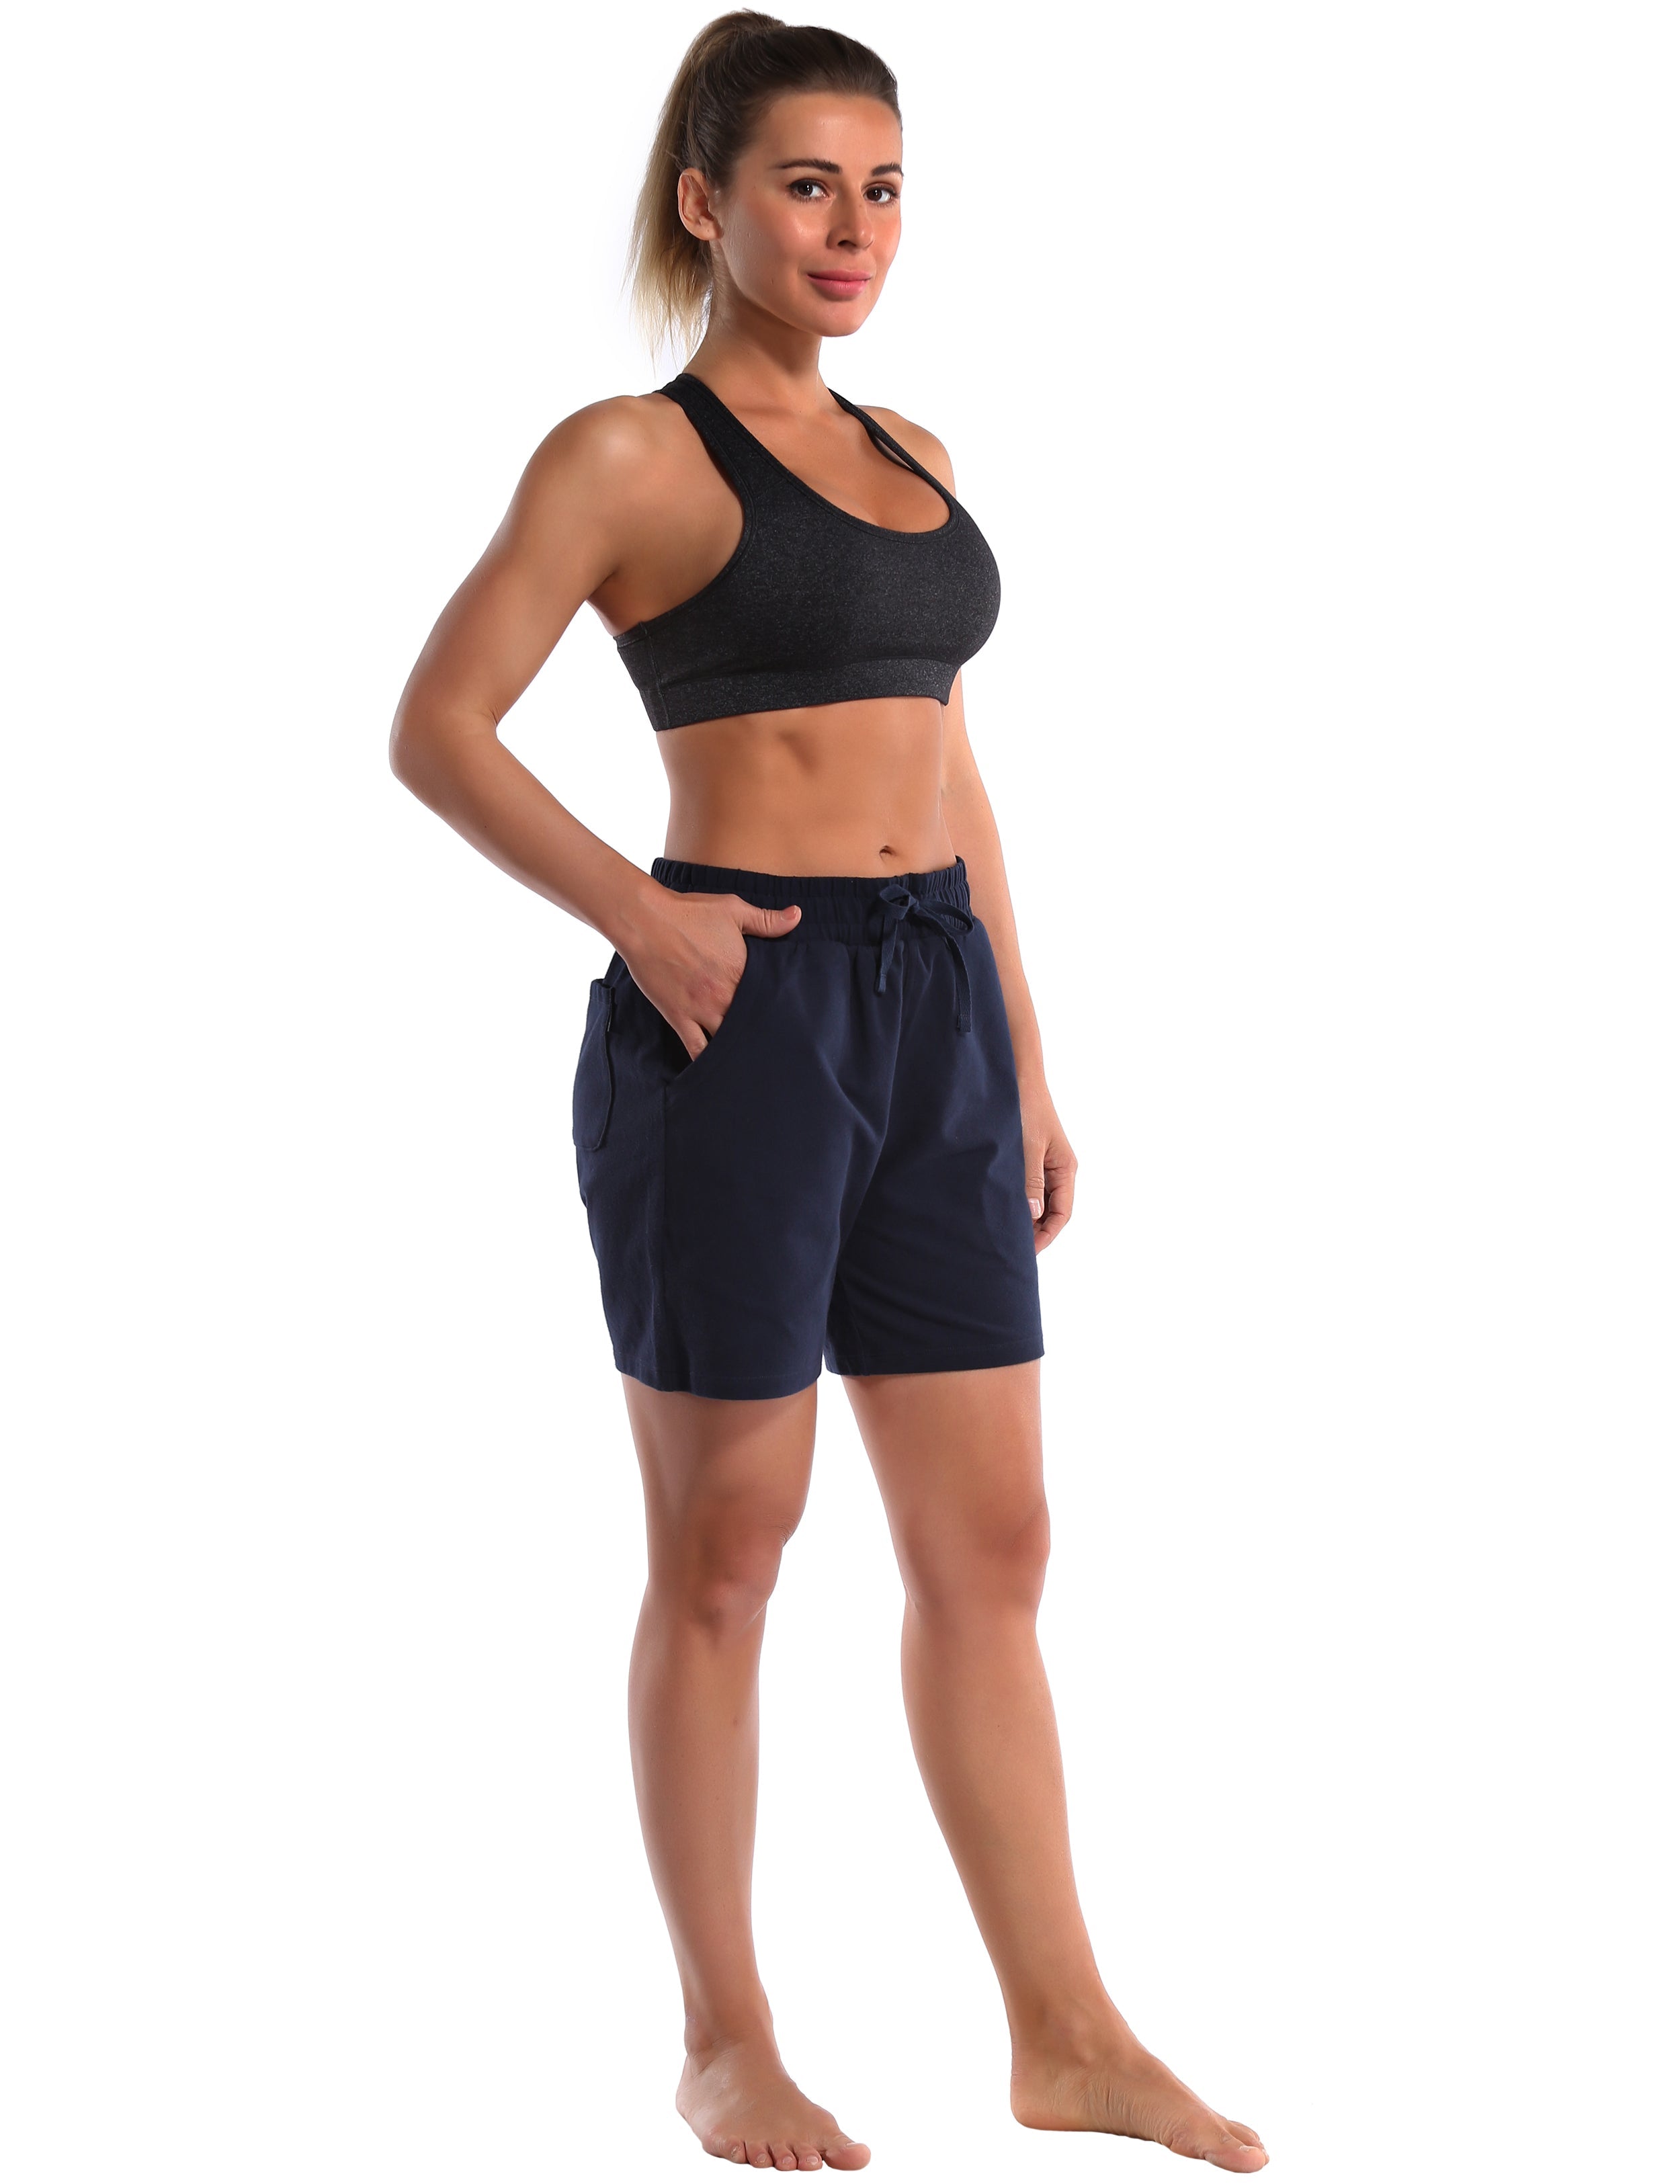 5" Joggers Shorts darknavy 90% Cotton, 10% Spandex Soft and Elastic Drawstring closure Lightweight & breathable fabric wicks away sweat to keep you comfortable Elastic waistband with internal drawcord for a snug, adjustable fit Big side pockets are available for 4.7", 5", 5.5" mobile phone Reflective logo helps you stand out in low light Perfect for any types of outdoor exercises and indoor fitness,like Golf,running,walking,jogging,lounging,workout,gym fitness,casual use,etc